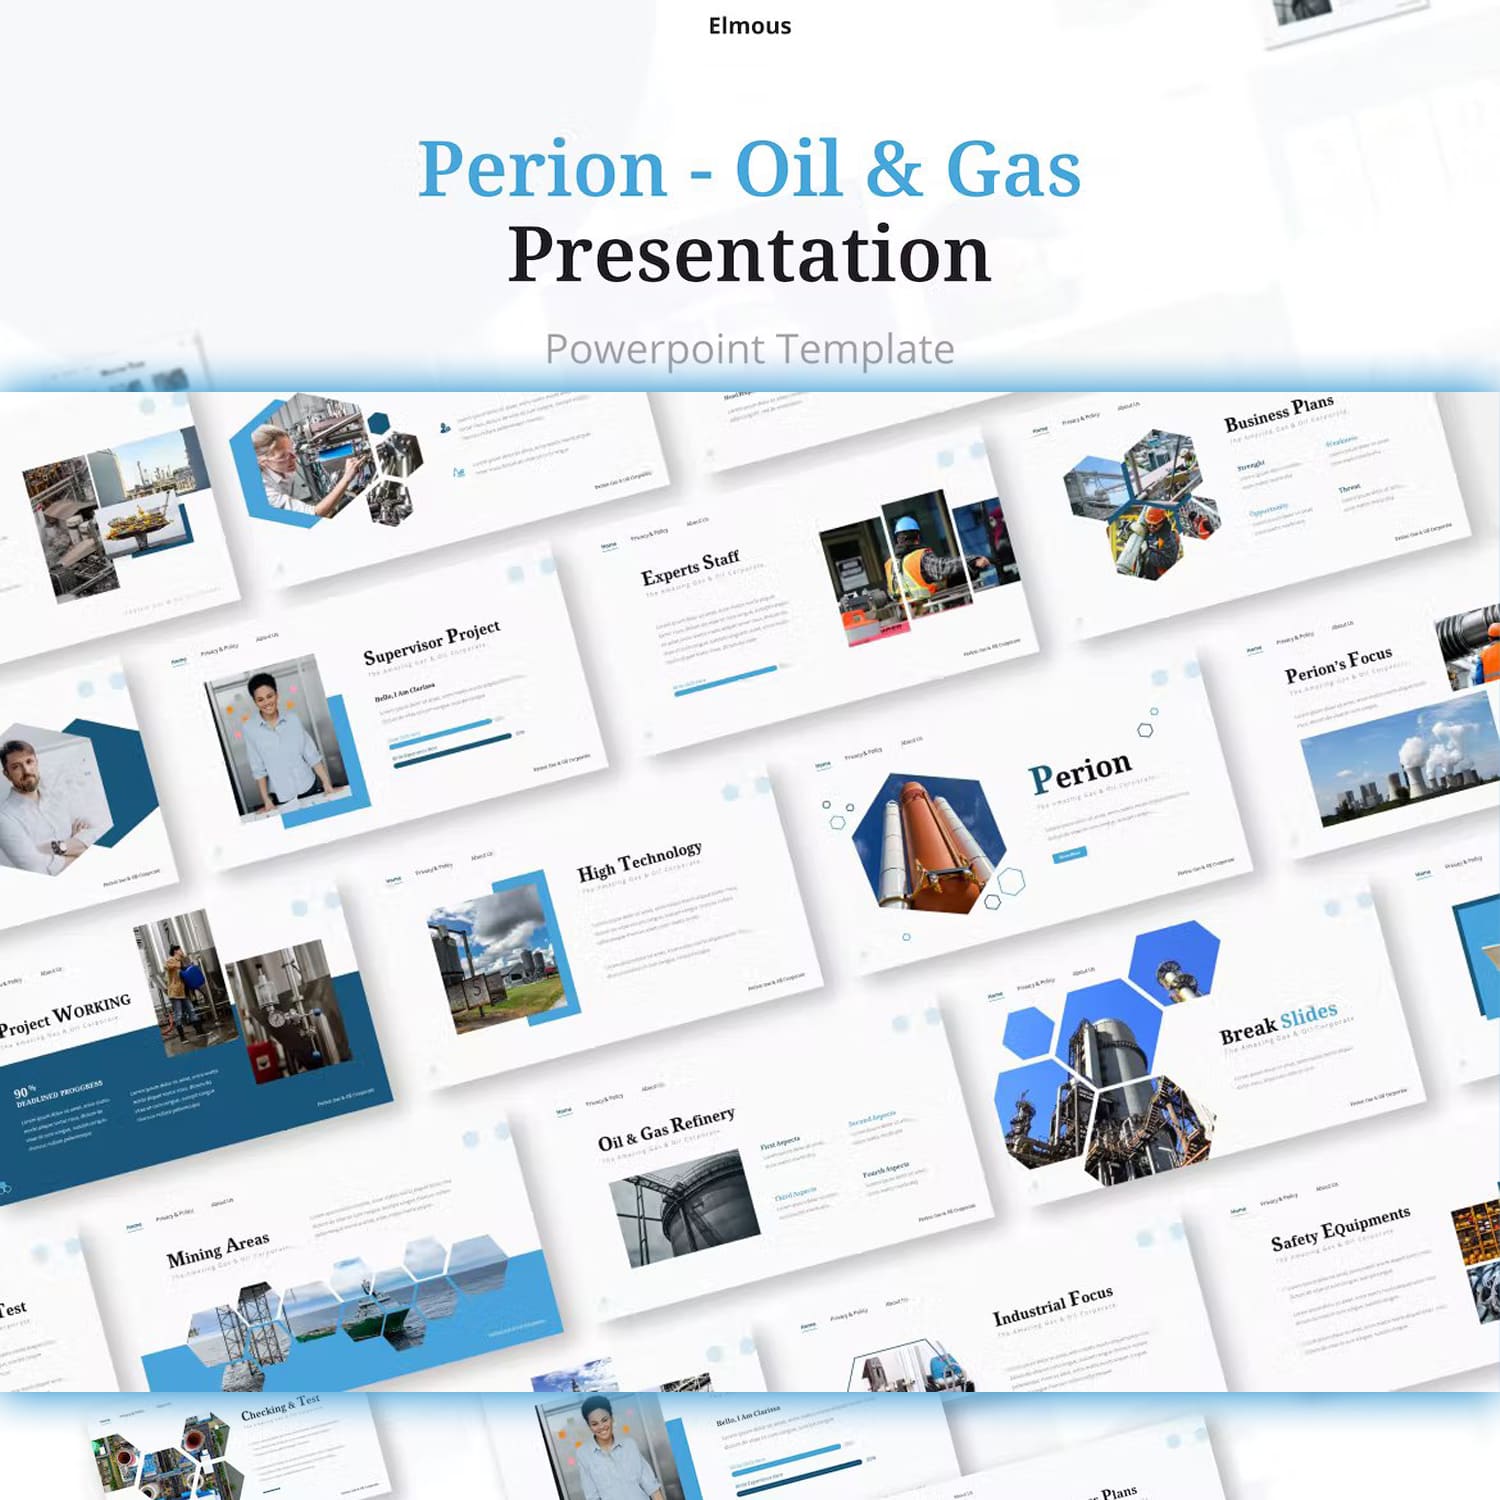 Perion gas oil powerpoint presentation template from elmous.